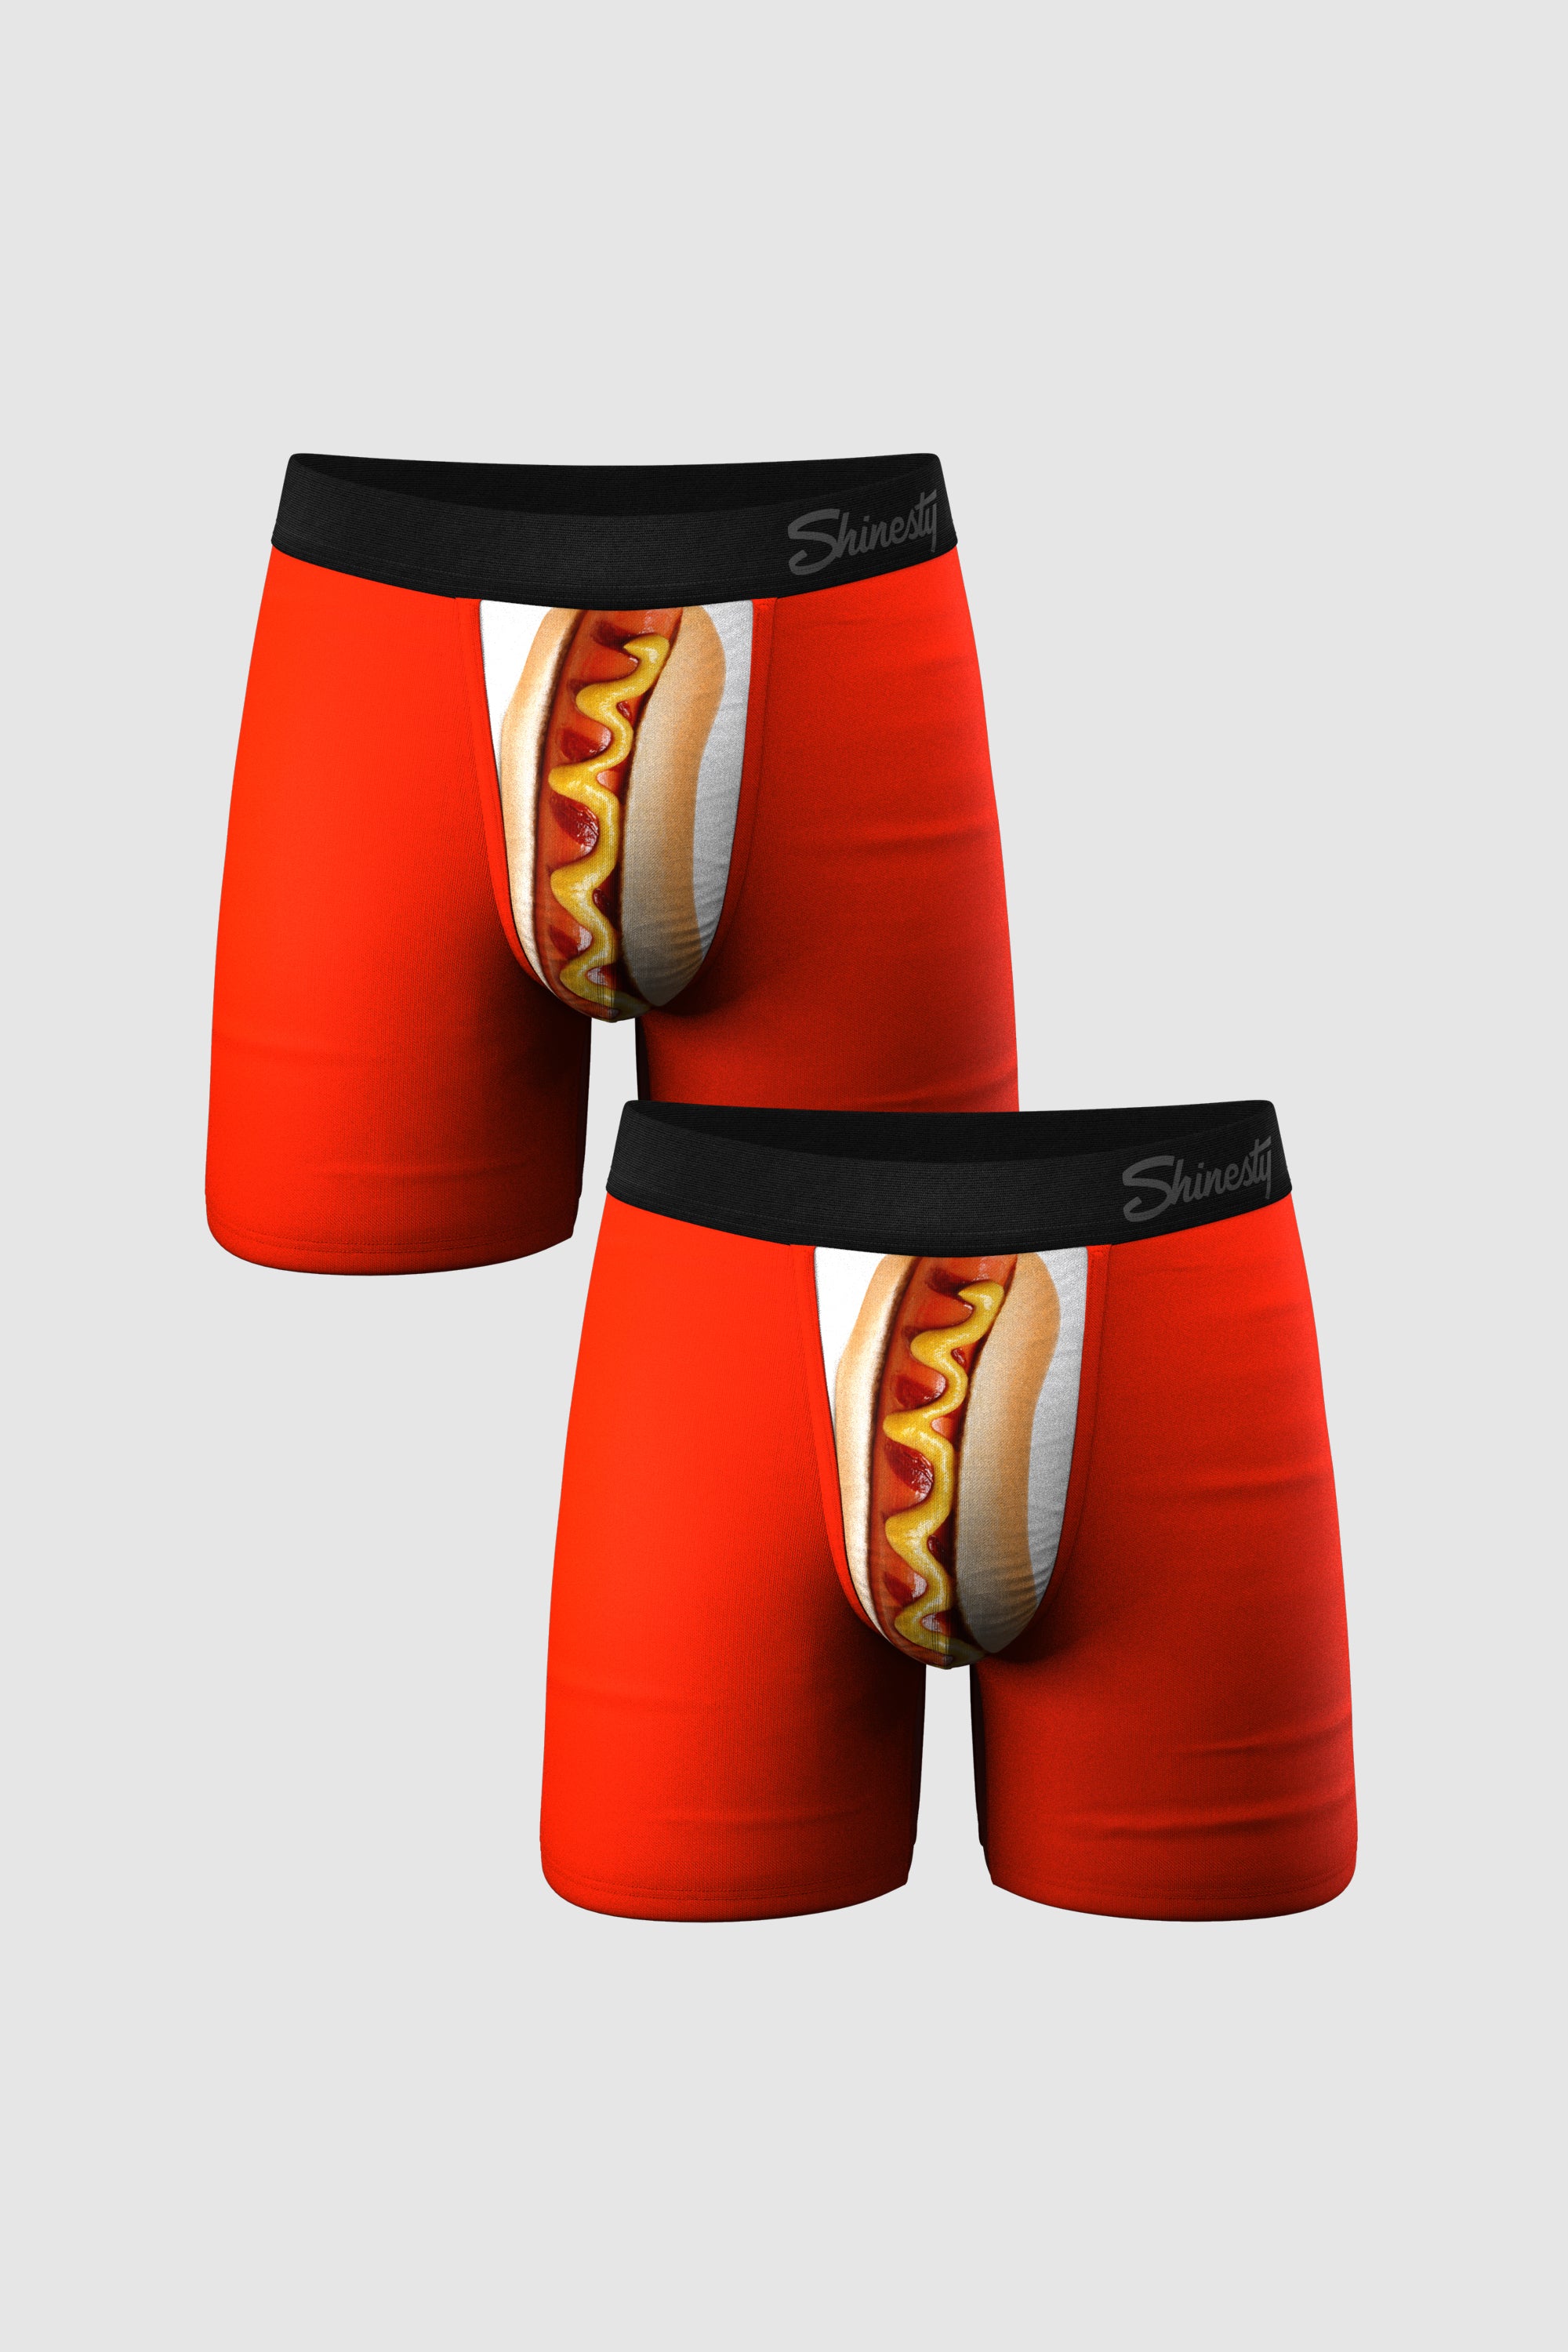 The Coney Islands | Hot Dog Ball Hammock® Boxer Couples Matching Underwear  2 Pack